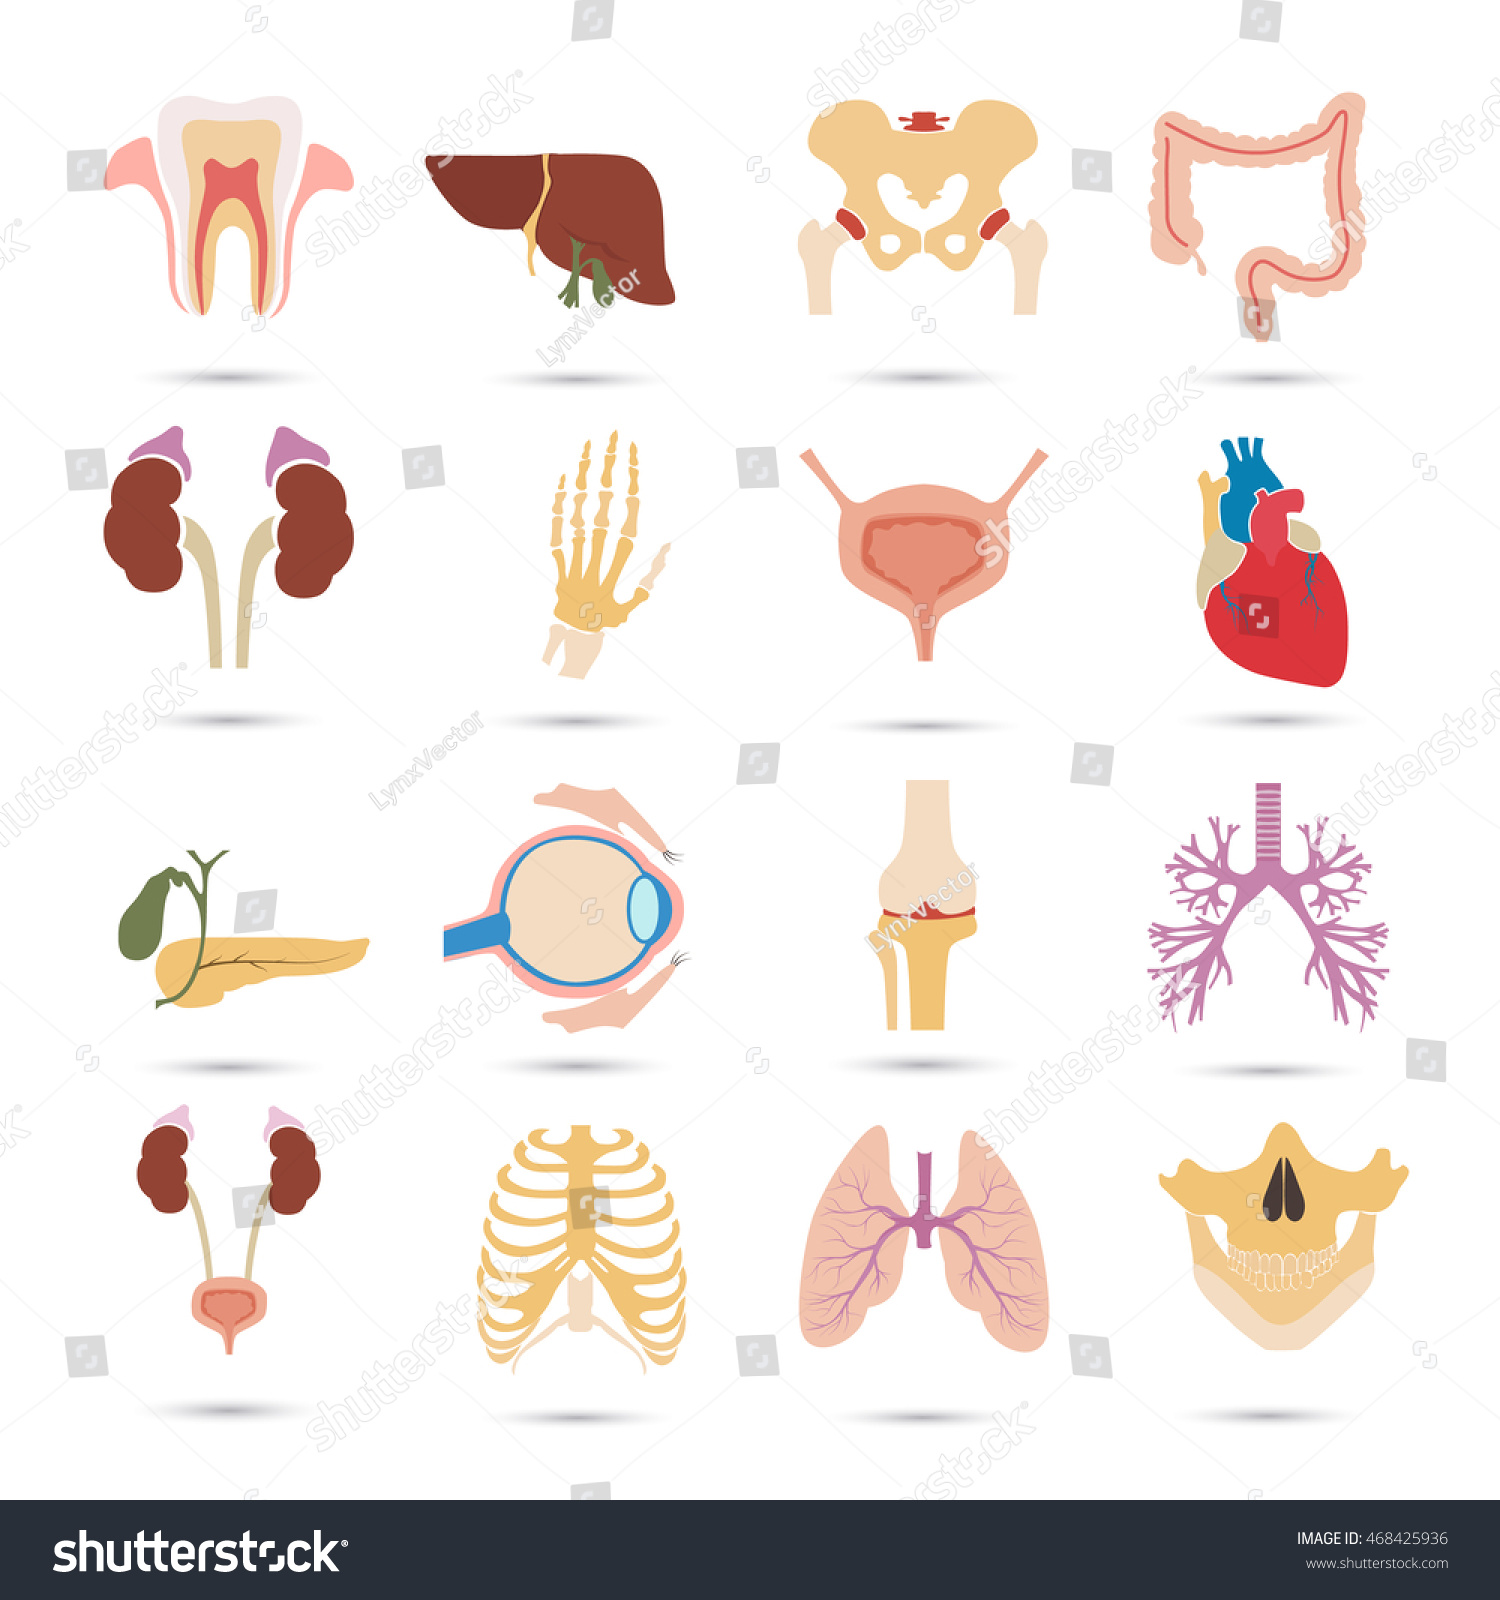 Set Of Sixteen Human Organs And Anatomic Parts Color Flat Icons Stock ...